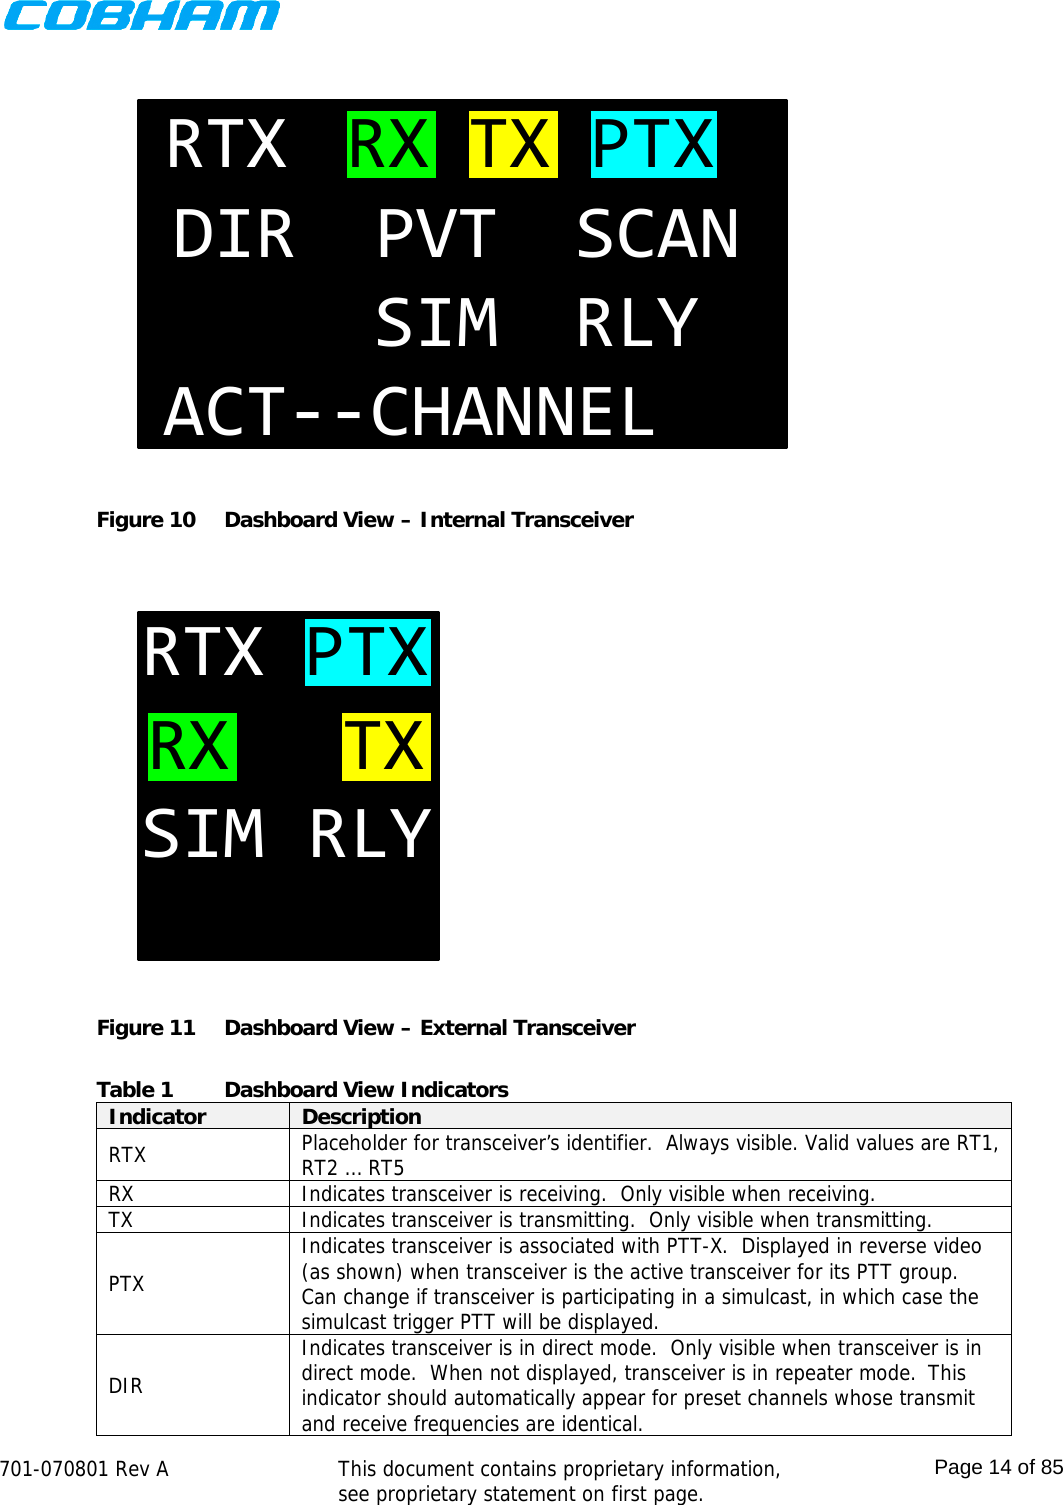    701-070801 Rev A   This document contains proprietary information, see proprietary statement on first page.  Page 14 of 85  ACT--CHANNELRTX RX TX PTXDIR PVT SCANSIM RLY Figure 10  Dashboard View – Internal Transceiver  RTXRX TXPTXSIM RLY Figure 11  Dashboard View – External Transceiver  Table 1  Dashboard View Indicators Indicator  Description RTX  Placeholder for transceiver’s identifier.  Always visible. Valid values are RT1, RT2 … RT5 RX  Indicates transceiver is receiving.  Only visible when receiving. TX  Indicates transceiver is transmitting.  Only visible when transmitting. PTX Indicates transceiver is associated with PTT-X.  Displayed in reverse video (as shown) when transceiver is the active transceiver for its PTT group.  Can change if transceiver is participating in a simulcast, in which case the simulcast trigger PTT will be displayed. DIR Indicates transceiver is in direct mode.  Only visible when transceiver is in direct mode.  When not displayed, transceiver is in repeater mode.  This indicator should automatically appear for preset channels whose transmit and receive frequencies are identical. 